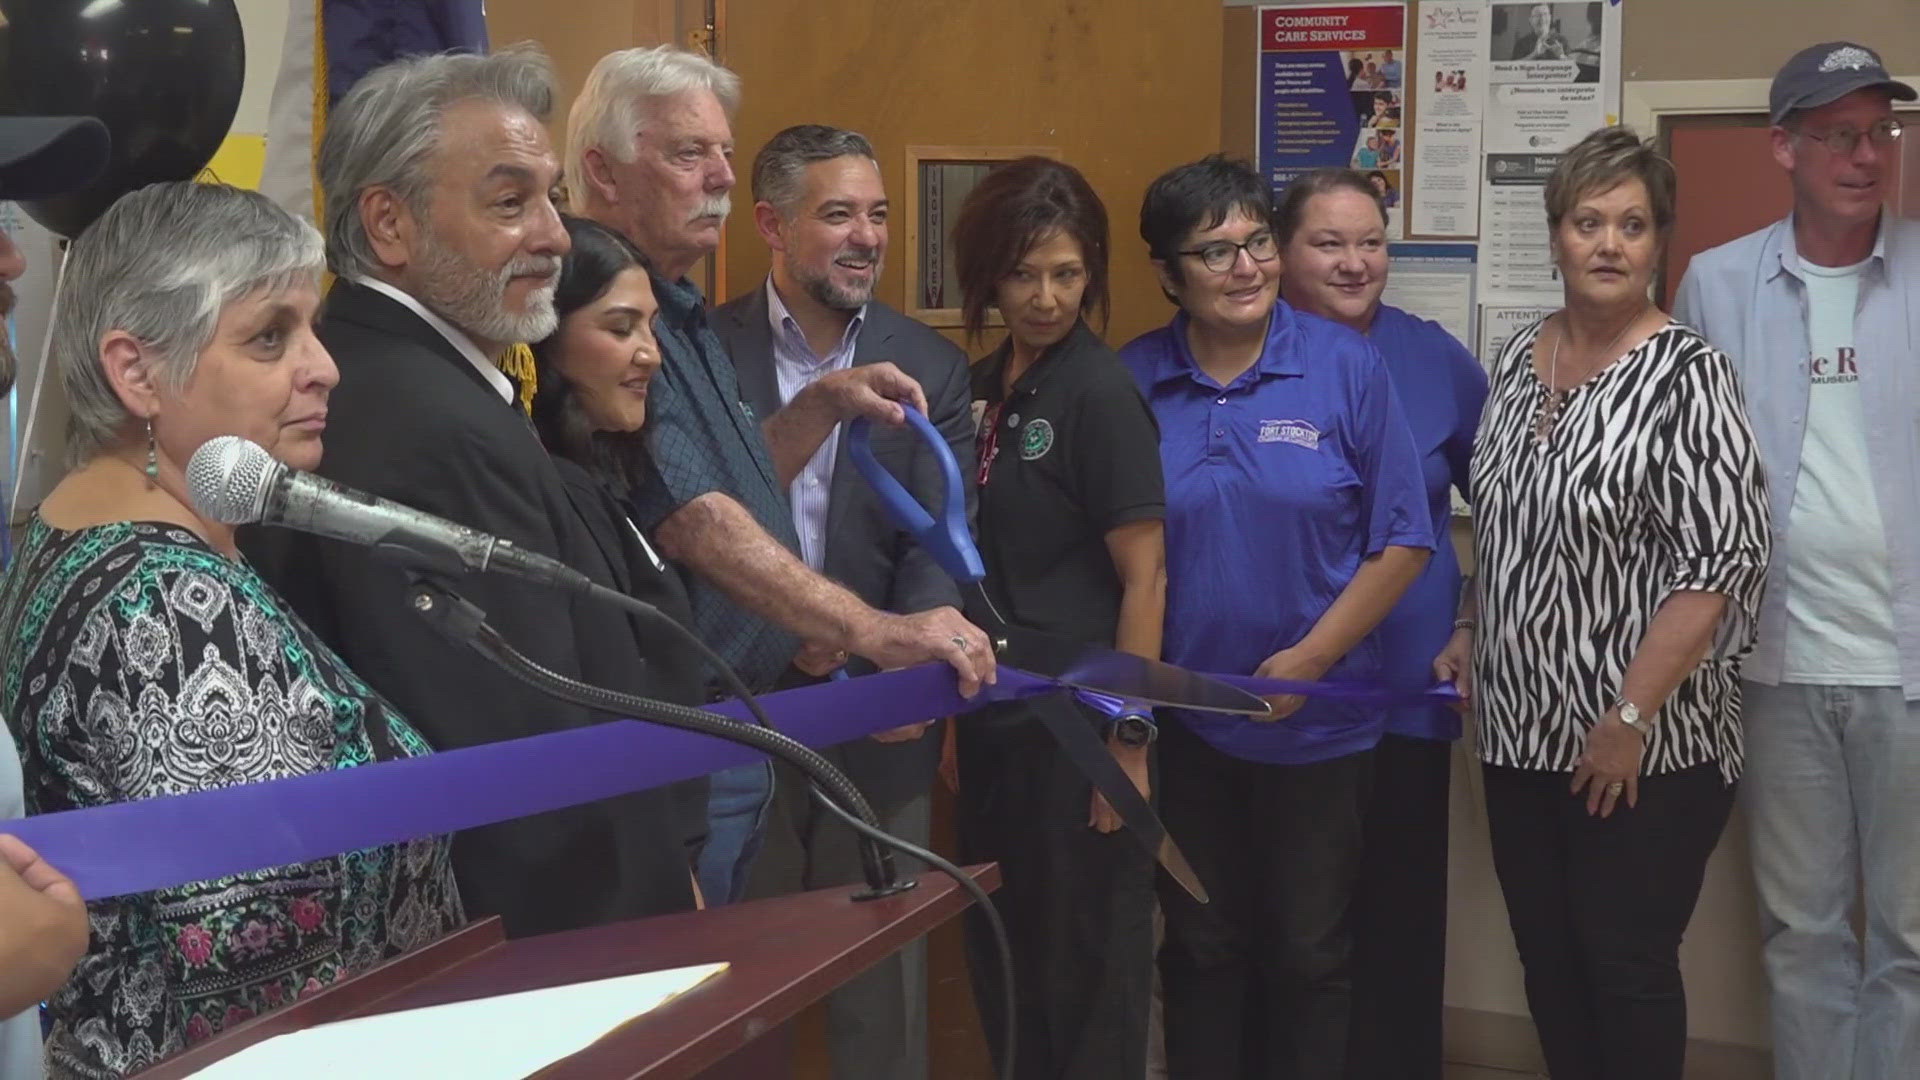 The clinic hopes to help provide preventive care, dental care, immunizations and more.